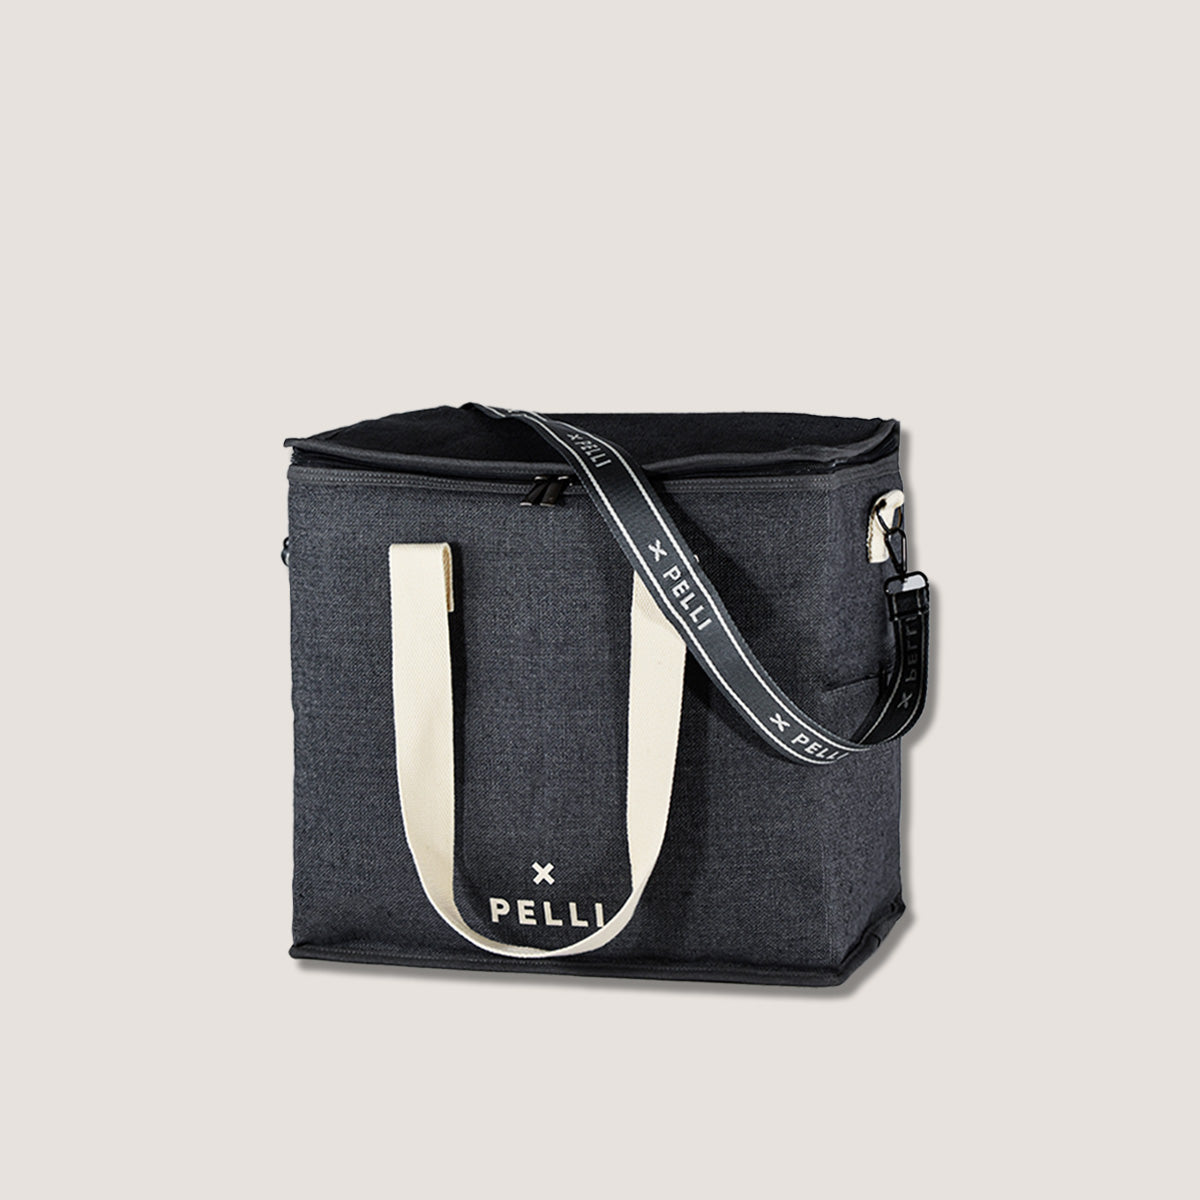 SECONDS OK Chill Crossbody - Jute Medium Cooler Bag with Shoulder Strap in Charcoal Grey